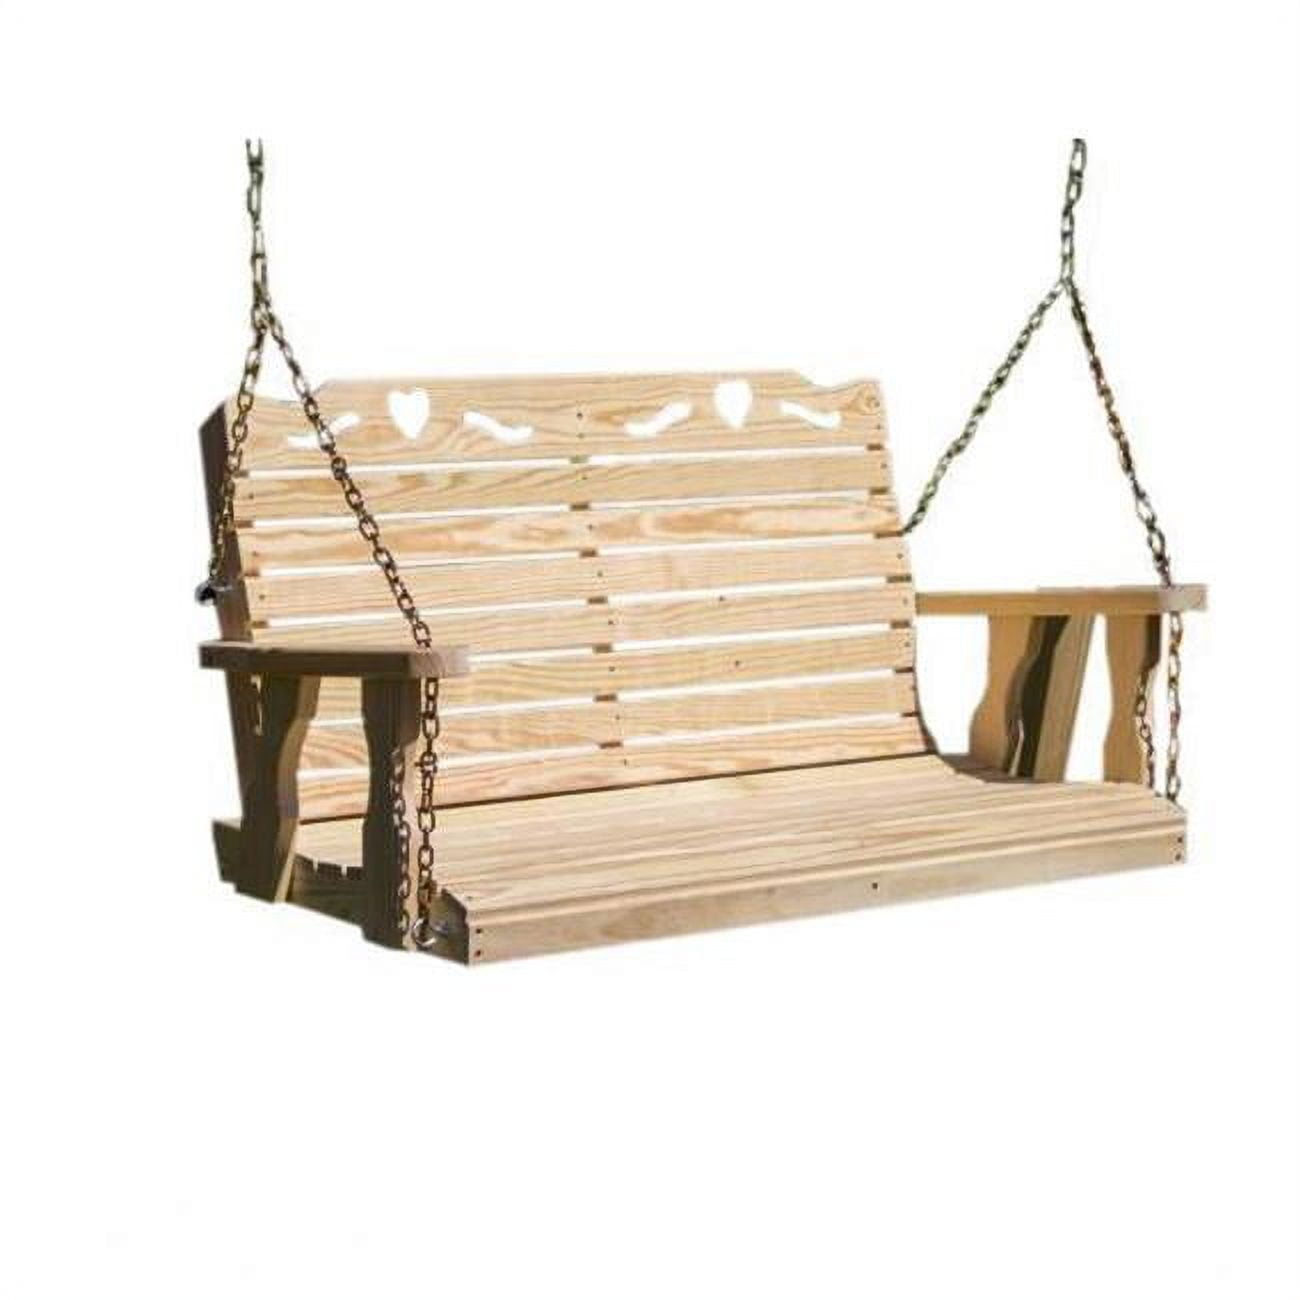 Picture of Creekvine Designs FS60CBHCVD 64 in. Treated Pine Crossback with Heart Porch Swing